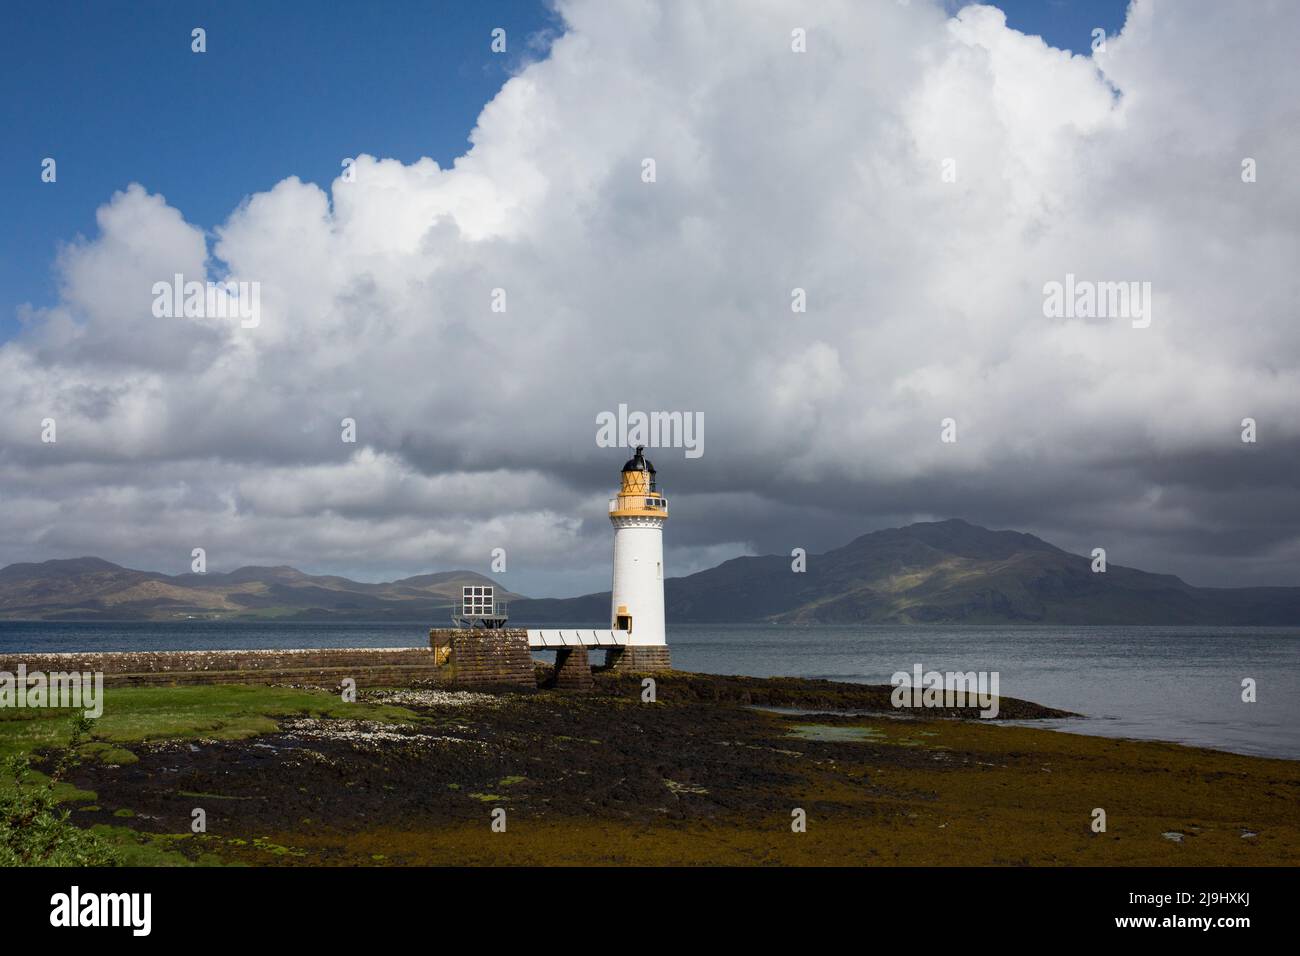 Rubha Nan Gall Lighthouse, Tobermory, île de Mull, Écosse Banque D'Images